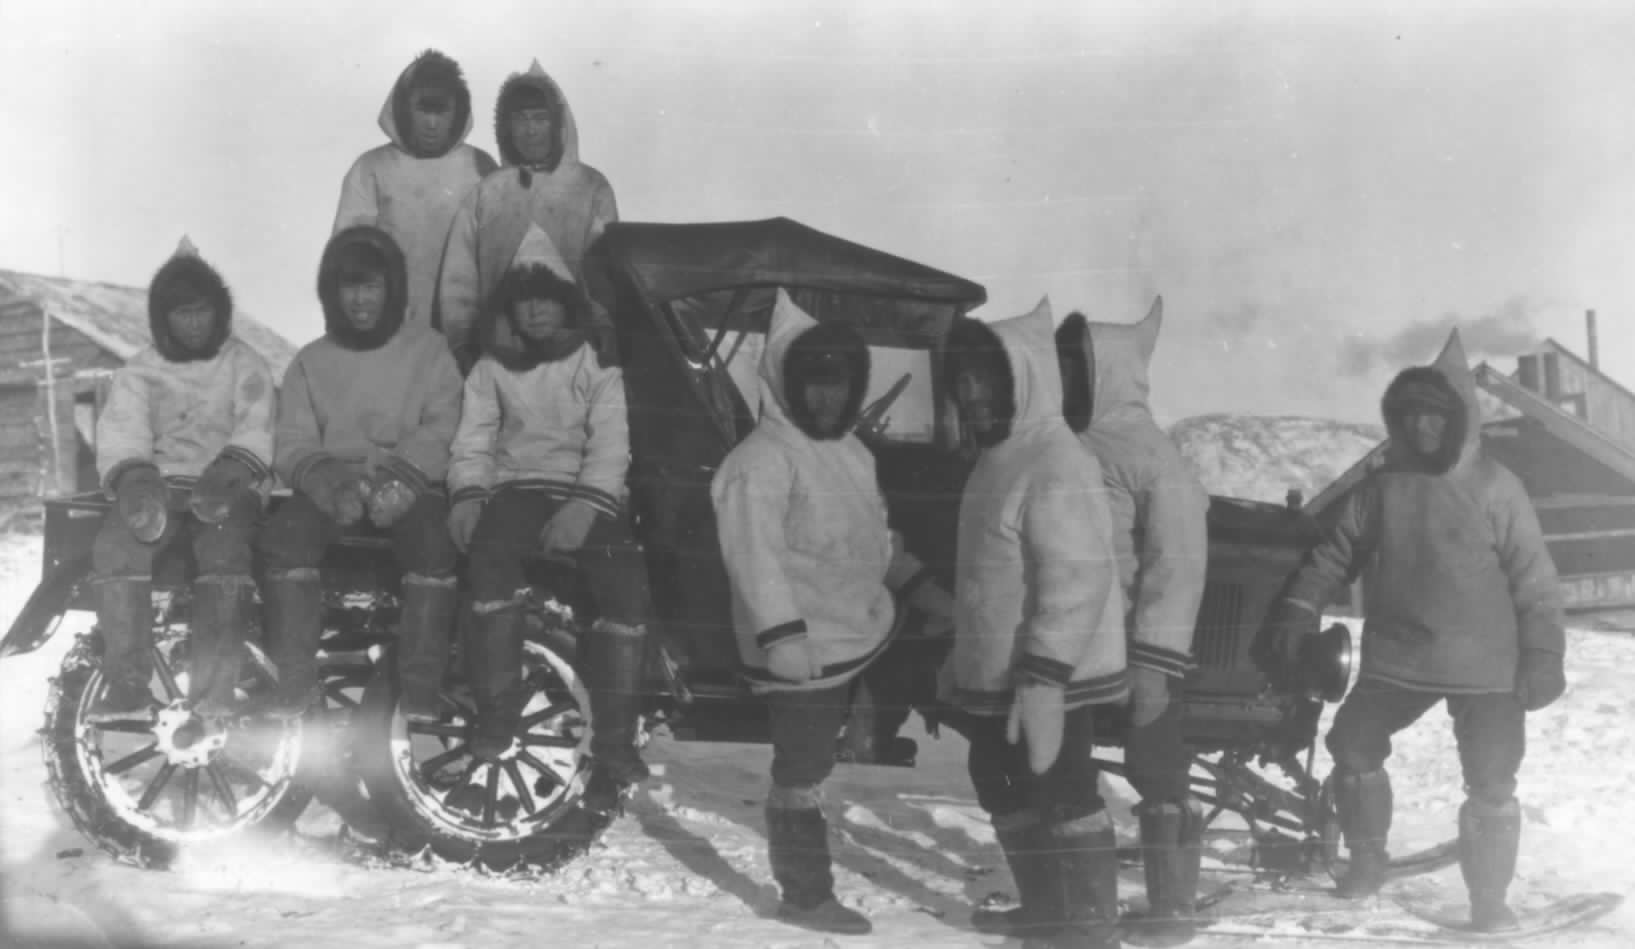 Labrador's first snowmobile was brought to the area in 1927. Photo courtesy of the Peary-MacMillan Arctic Museum, Bowdoin College. 